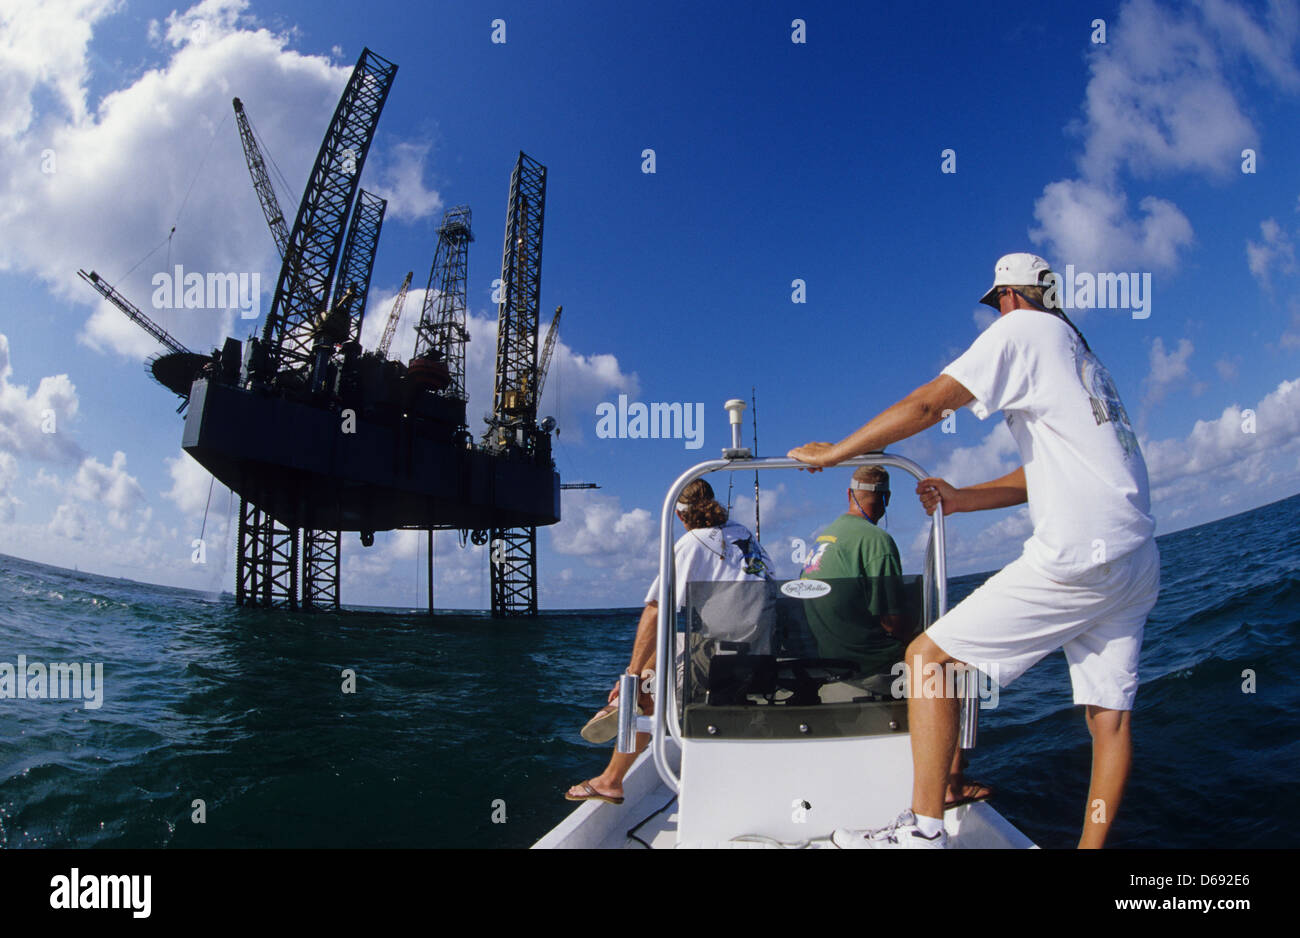 https://c8.alamy.com/comp/D692E6/men-trolling-and-fishing-near-an-oil-rig-drilling-platform-in-the-D692E6.jpg